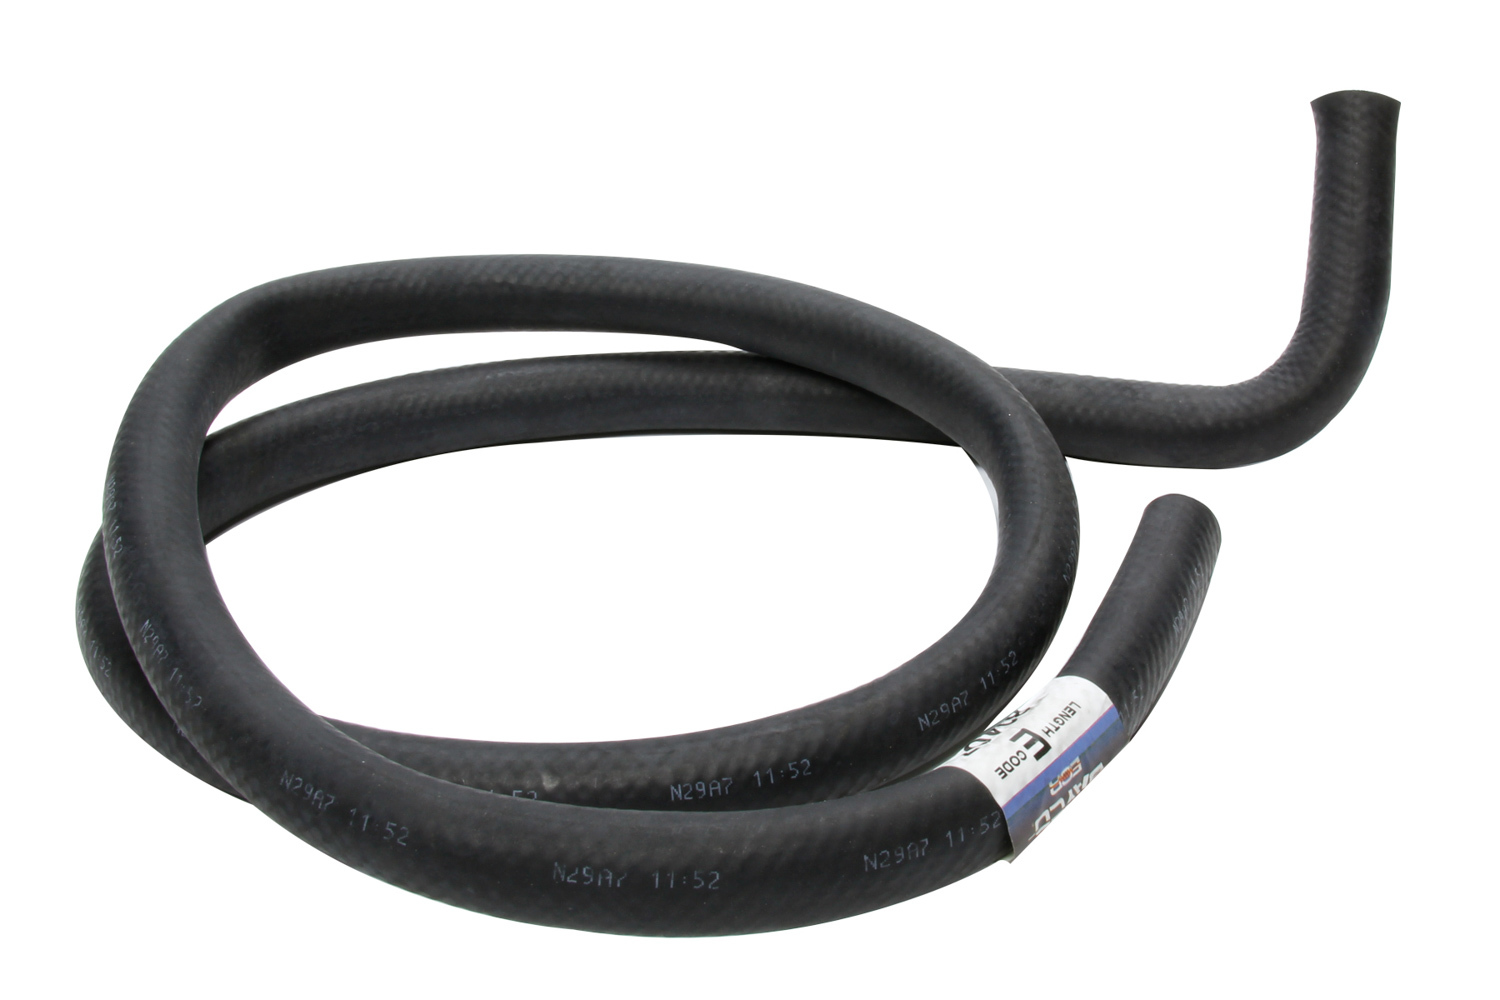 Vintage Air 099003 Hose, 90 Degree, 5/8 in ID, Molded Rubber, Black, 5 ft, Heater, Each